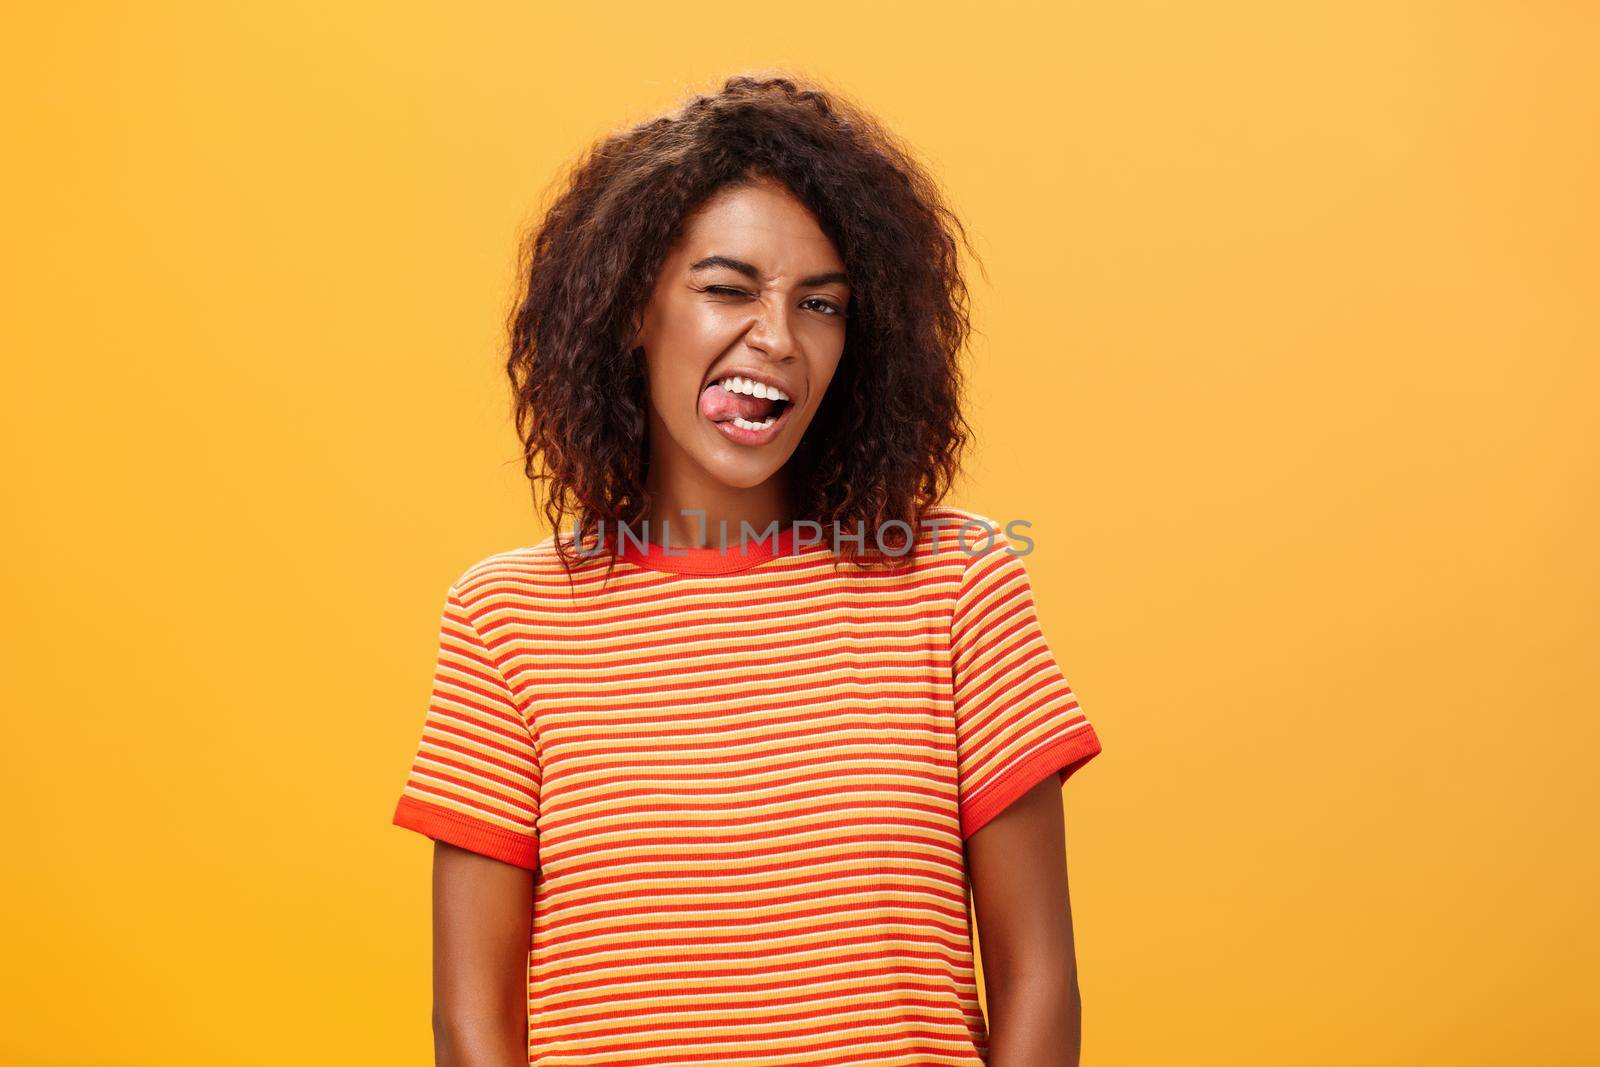 Portrait of daring and emotive confident flirty woman with afro hairstyle winking joyfully showing tongue posing carefree and enthusiastic against orange background flirting with hot guy by Benzoix